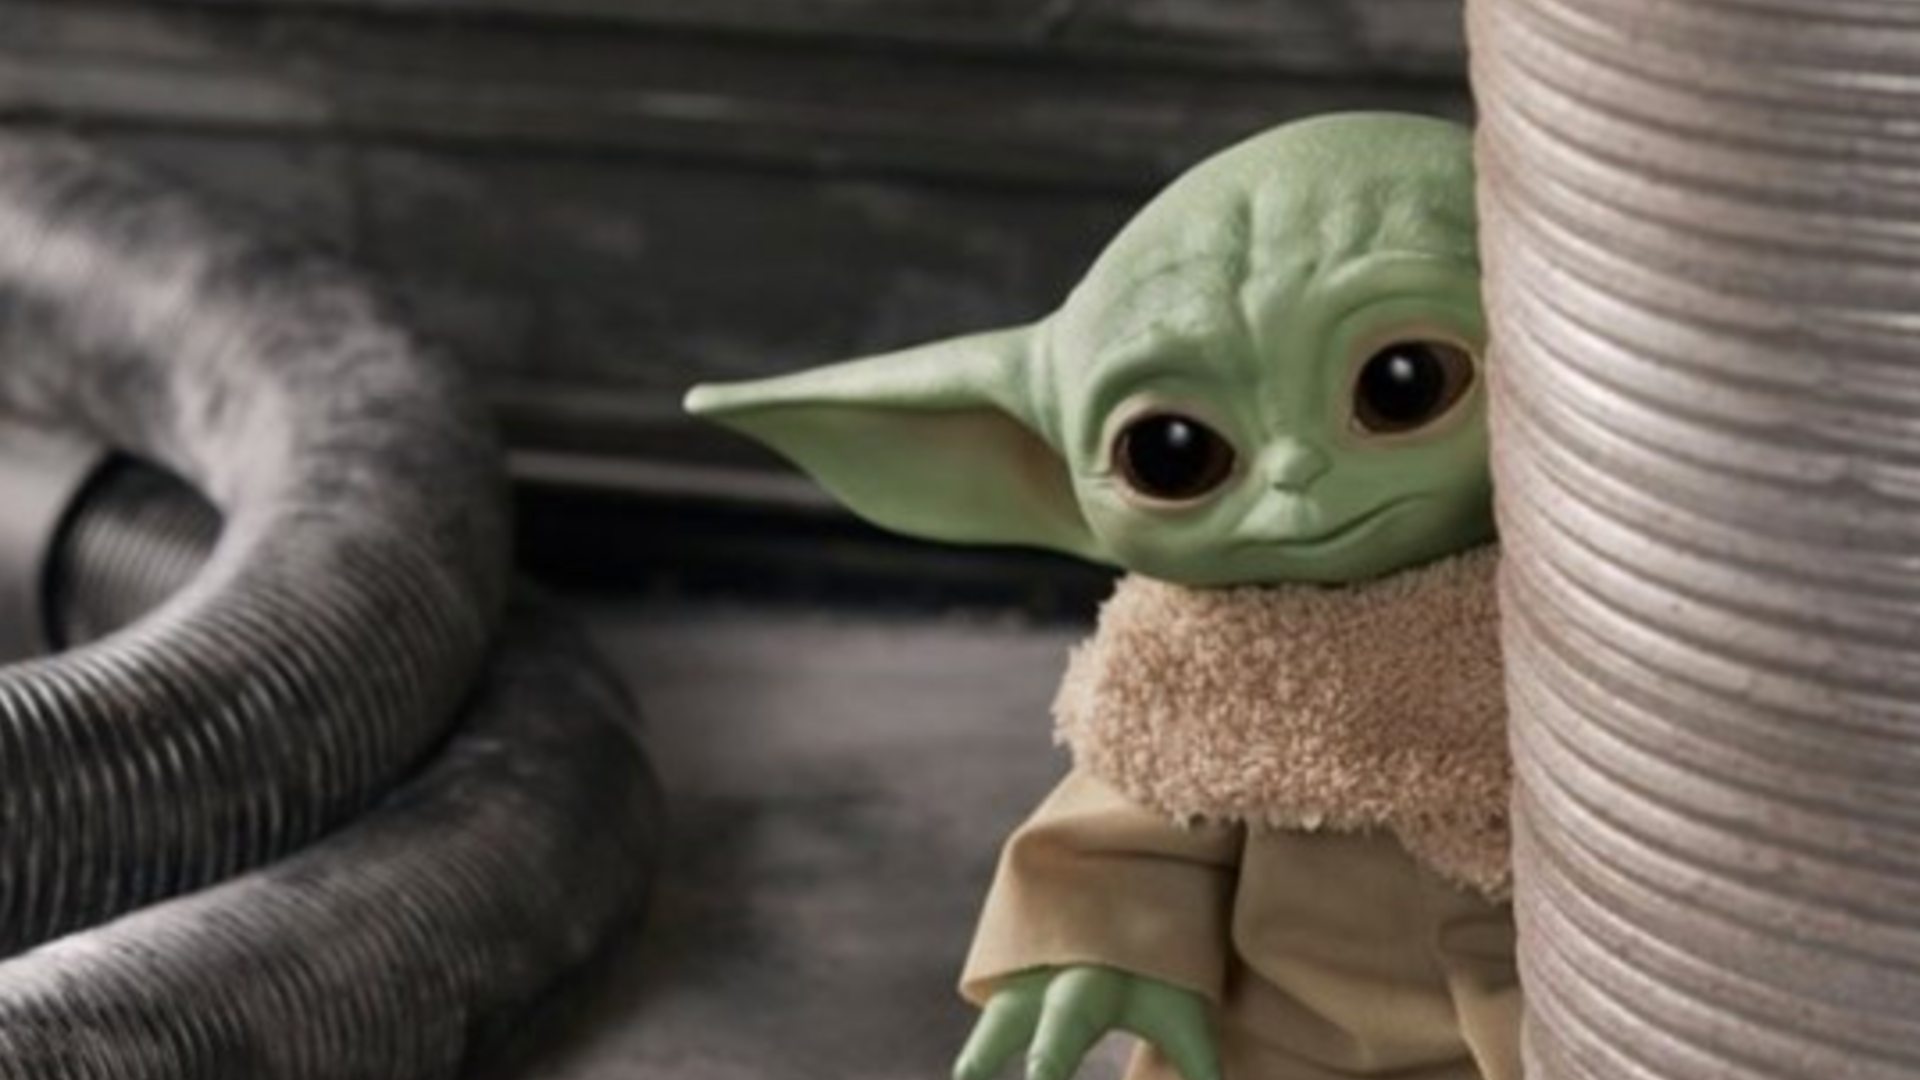 Get your own Baby Yoda for a bargain price with these Black Friday merch deals